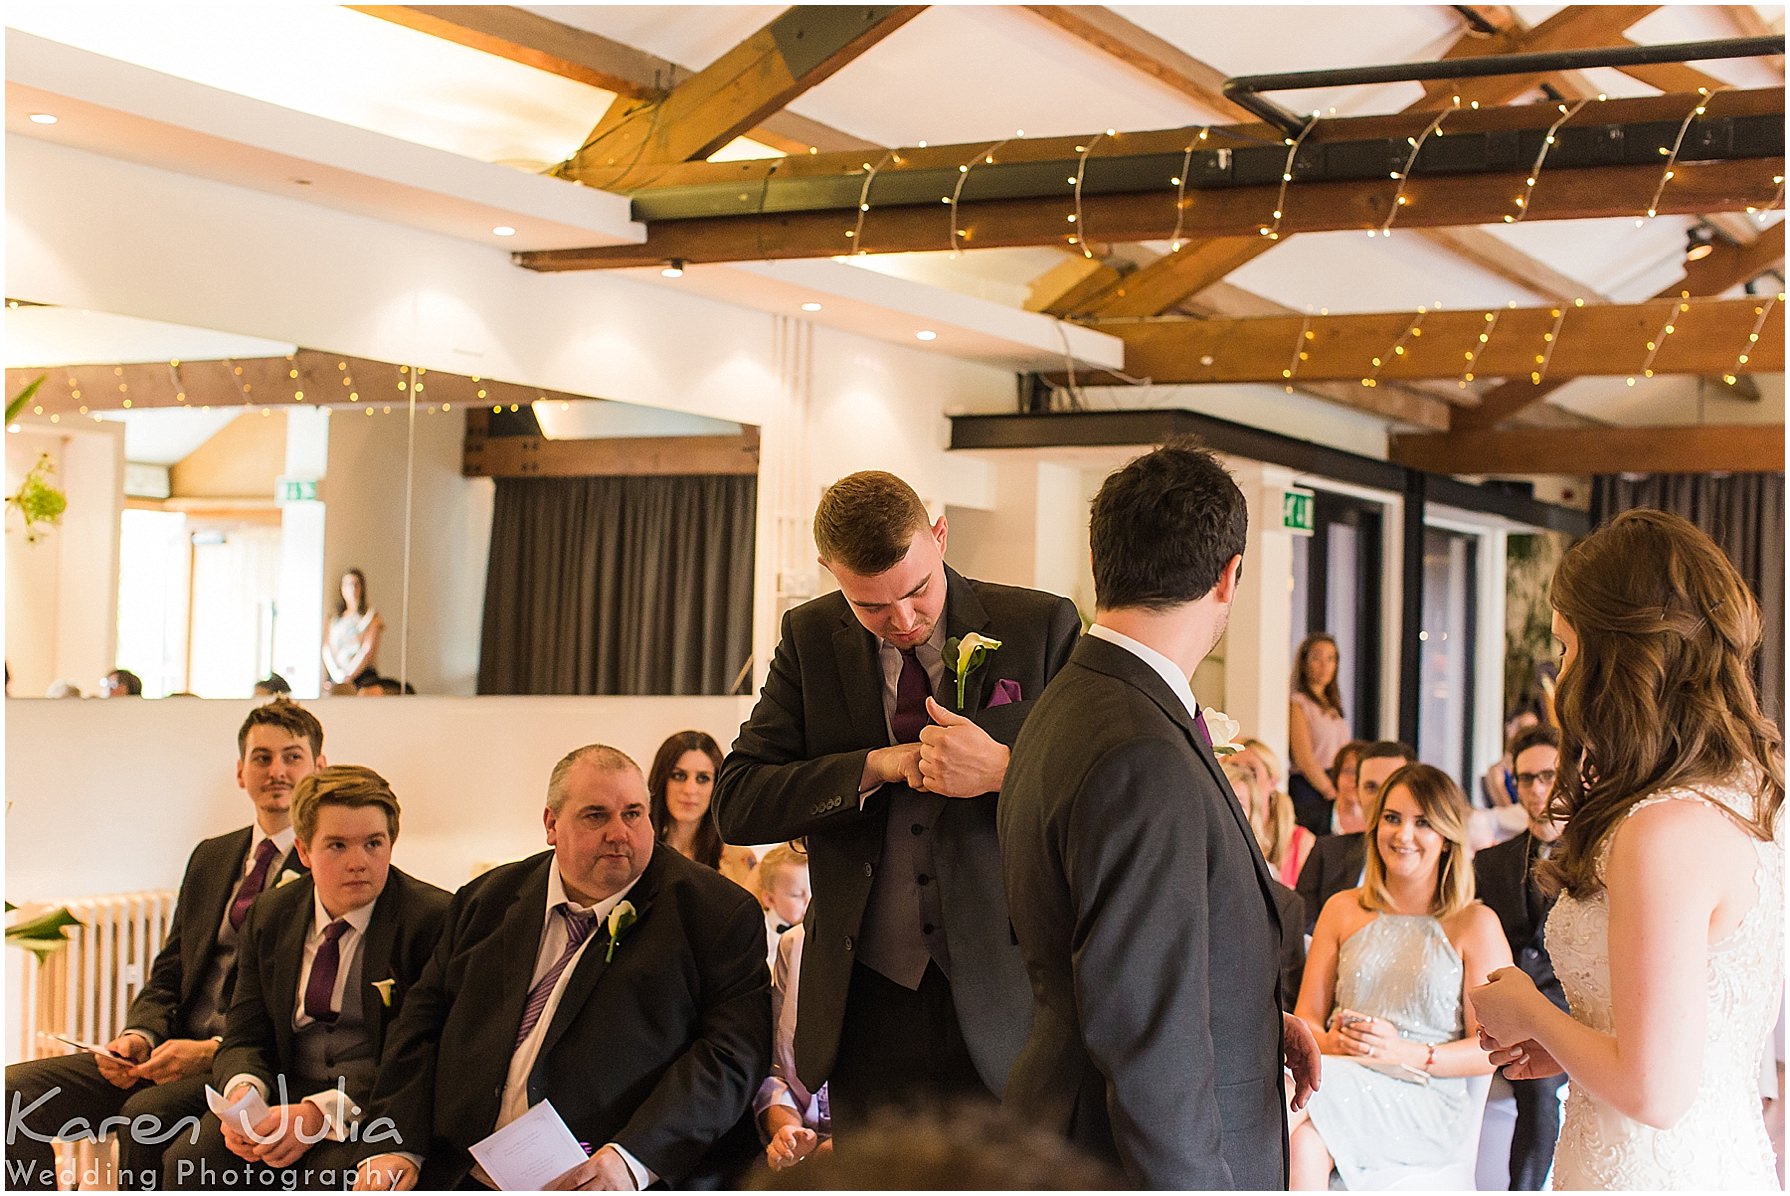 best man looks for rings during wedding ceremony at Castlefield Rooms